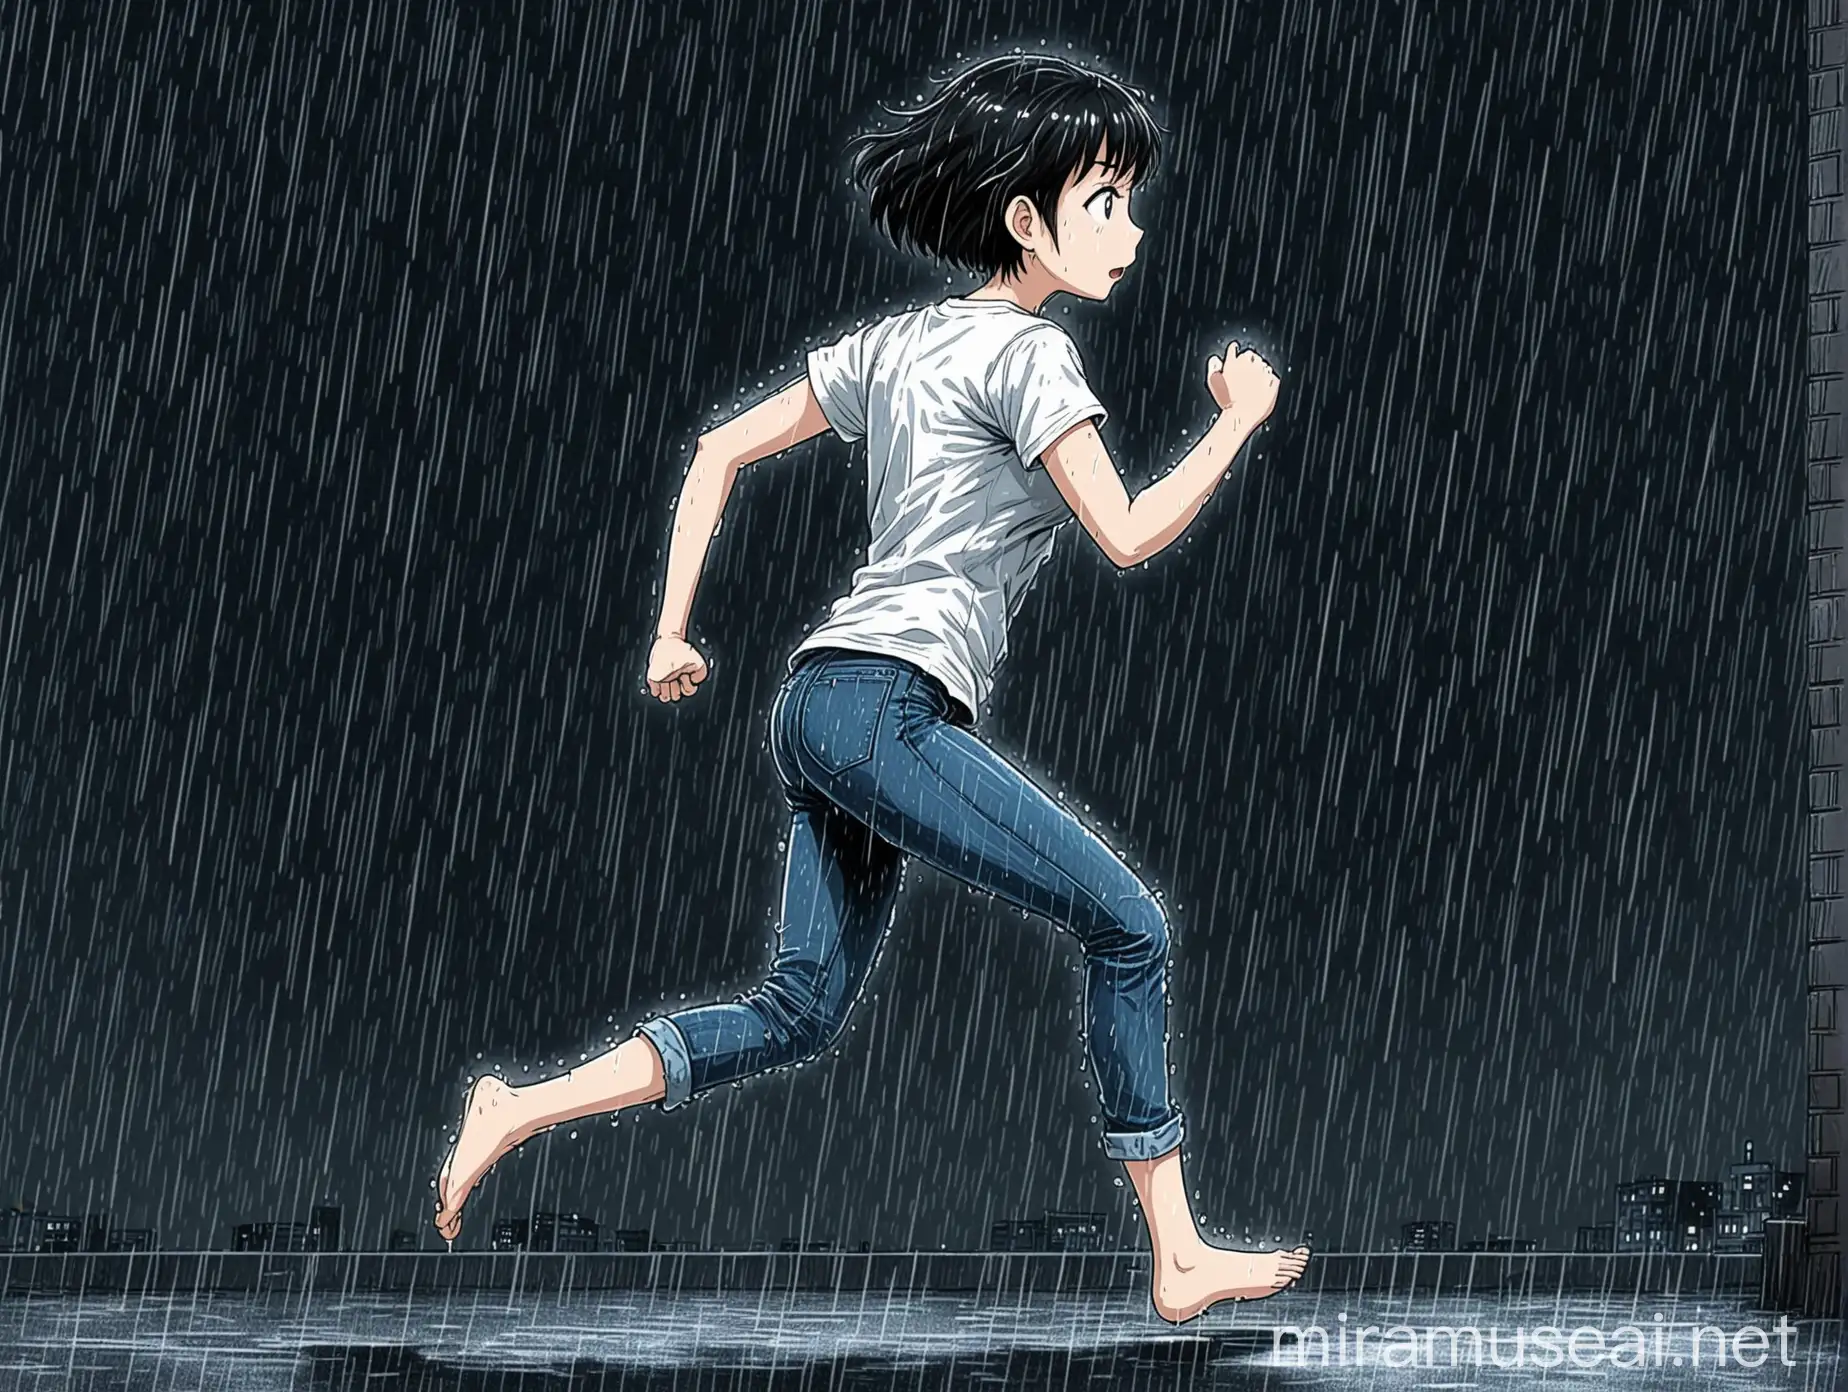 Running girl, rainy night, full length shot, side view, pencil drawing, be black, cartoon and animation image, short hair, short sleeve t-shirt, jeans, bare feet, super anime